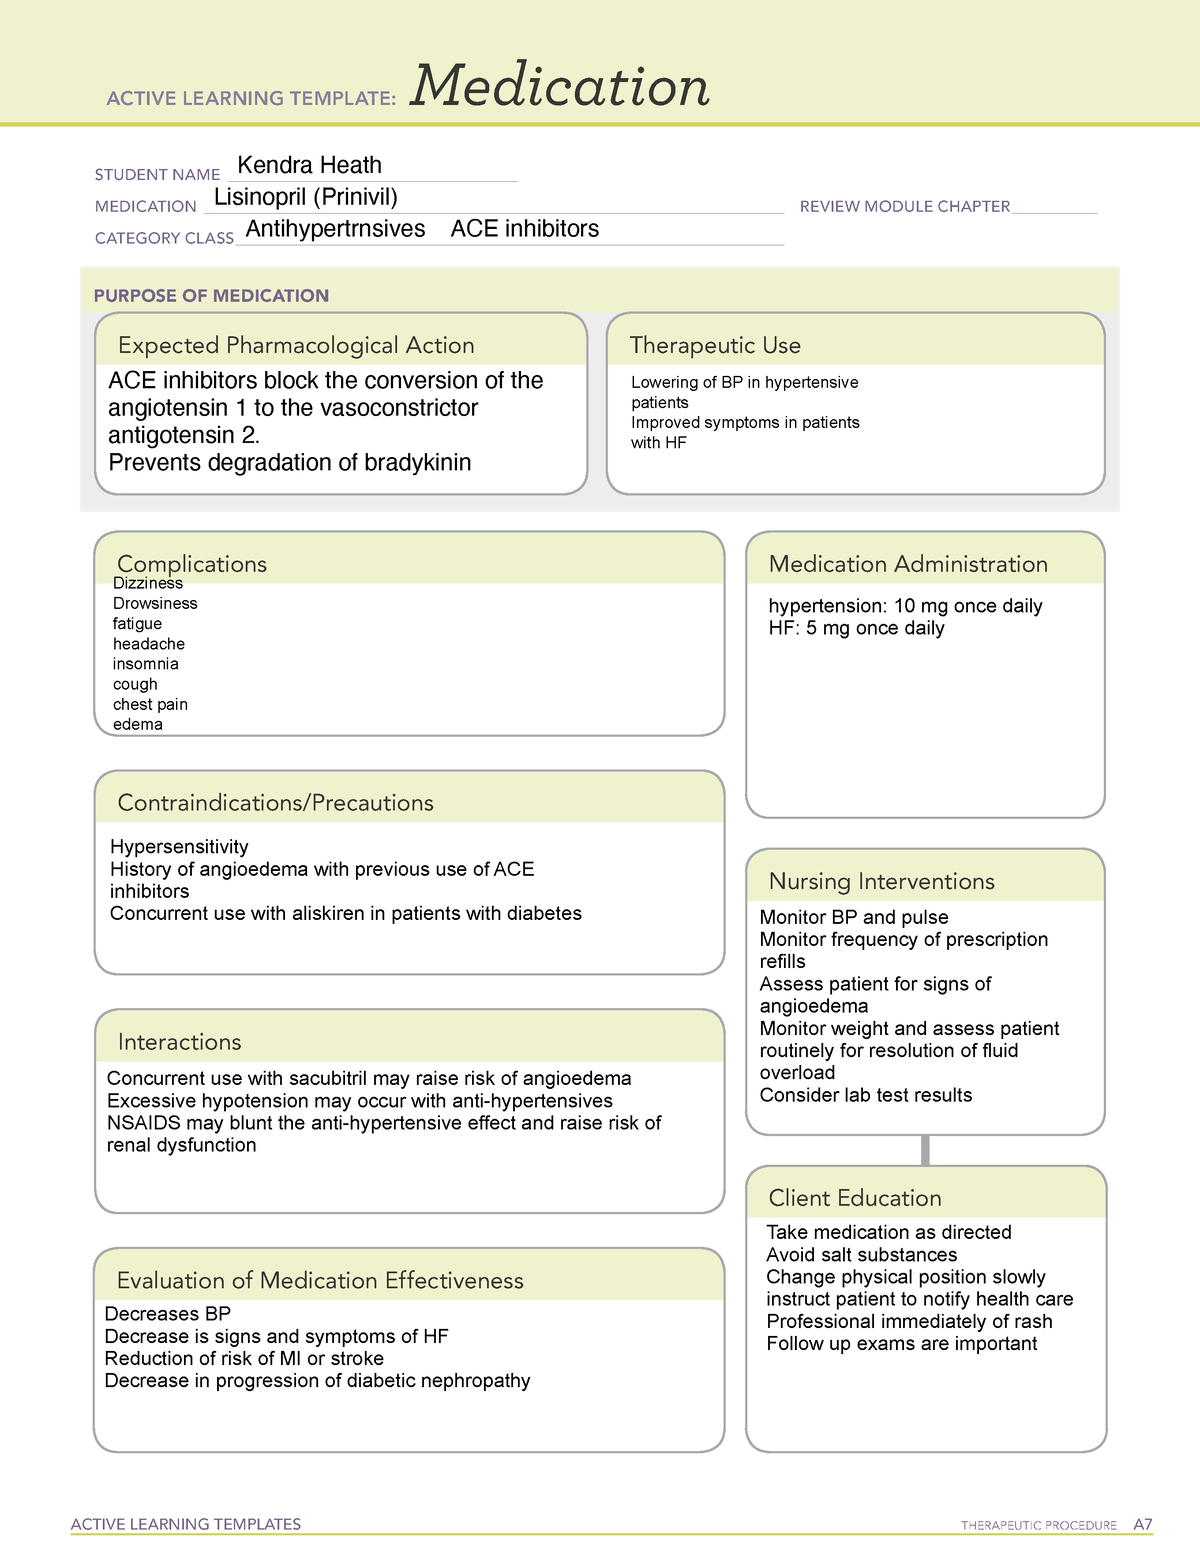 active-learning-template-medication-5-active-learning-templates